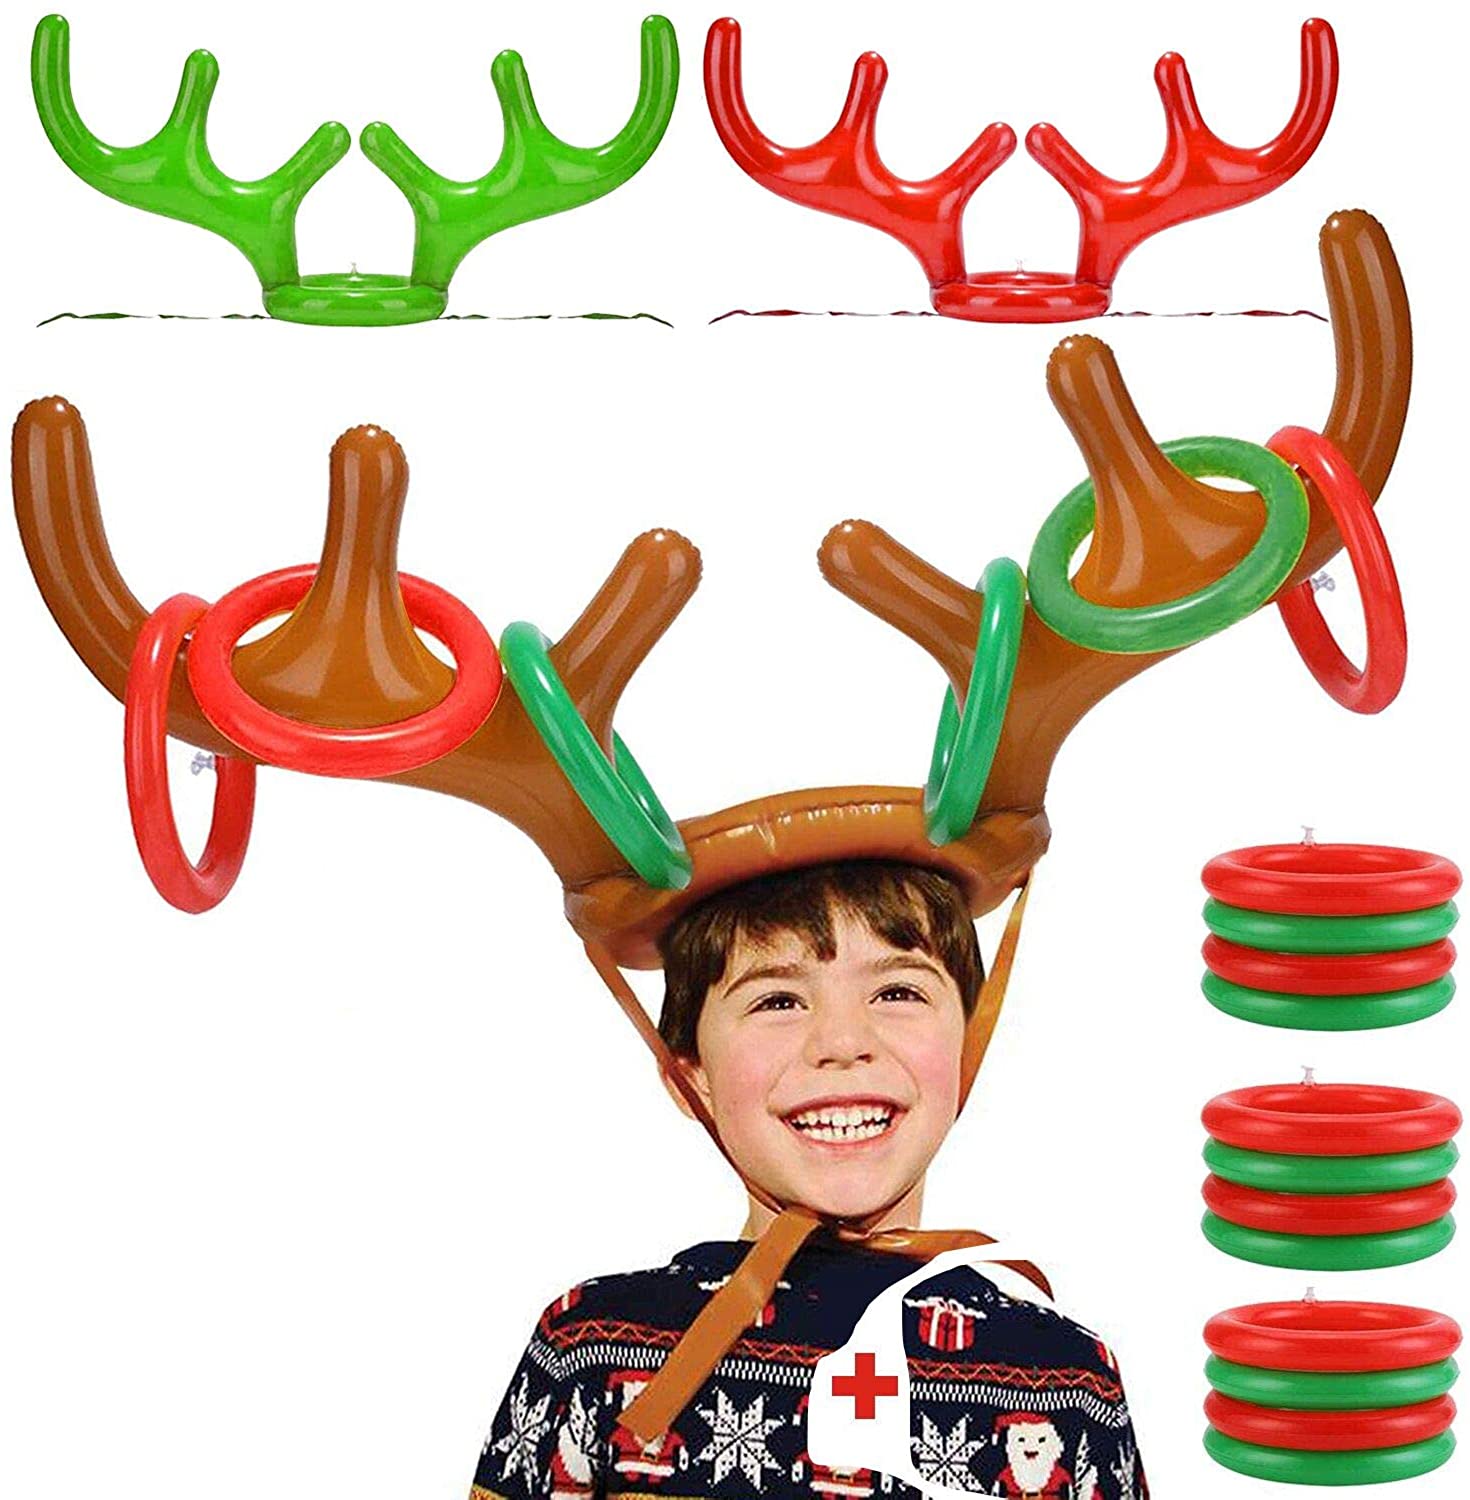 Migaven 2PCS Funny Inflatable Christmas Reindeer Antler Hat Toy Ring Toss Game Kit with 12 Rings Hand Pump for Kids Adults Xmas Party Favor Playing Game Supplies Antler Ring Toss 